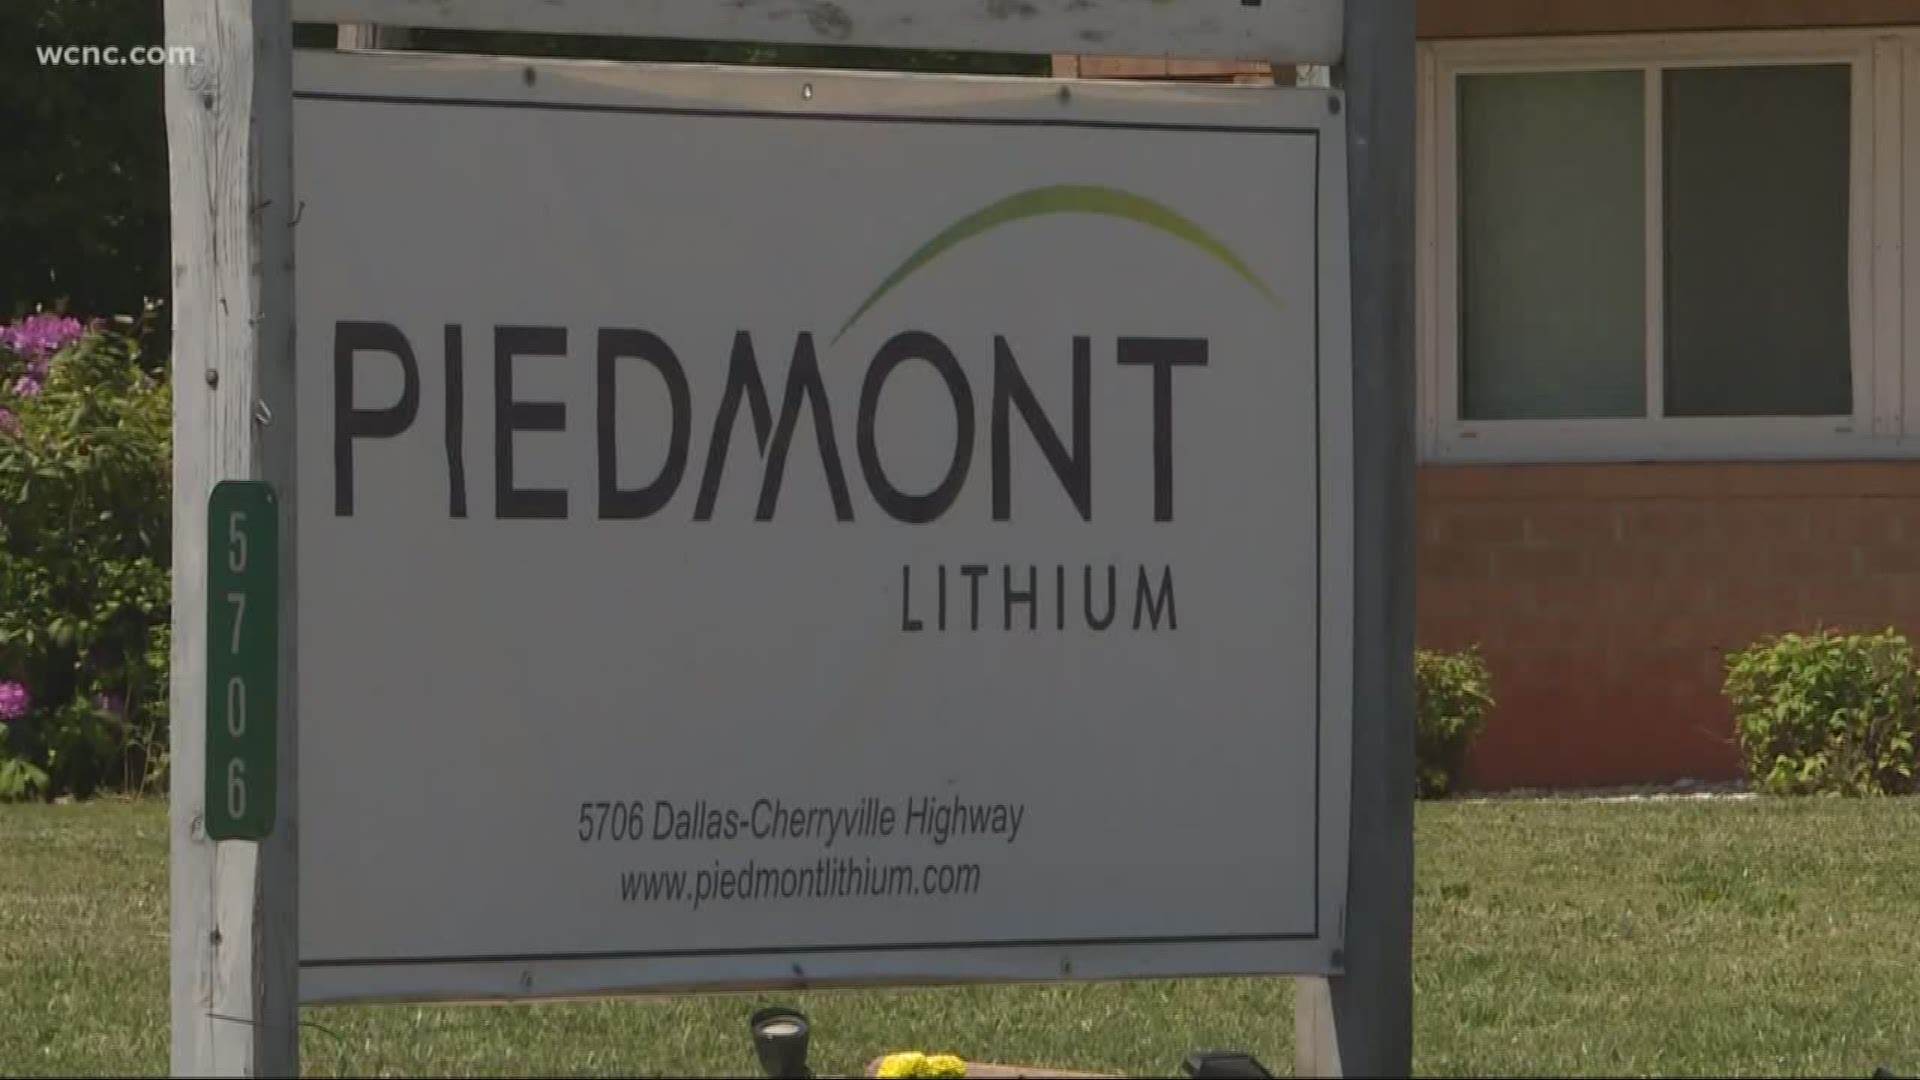 Piedmont Lithium hopes to open a new open-pit mine in 2021.